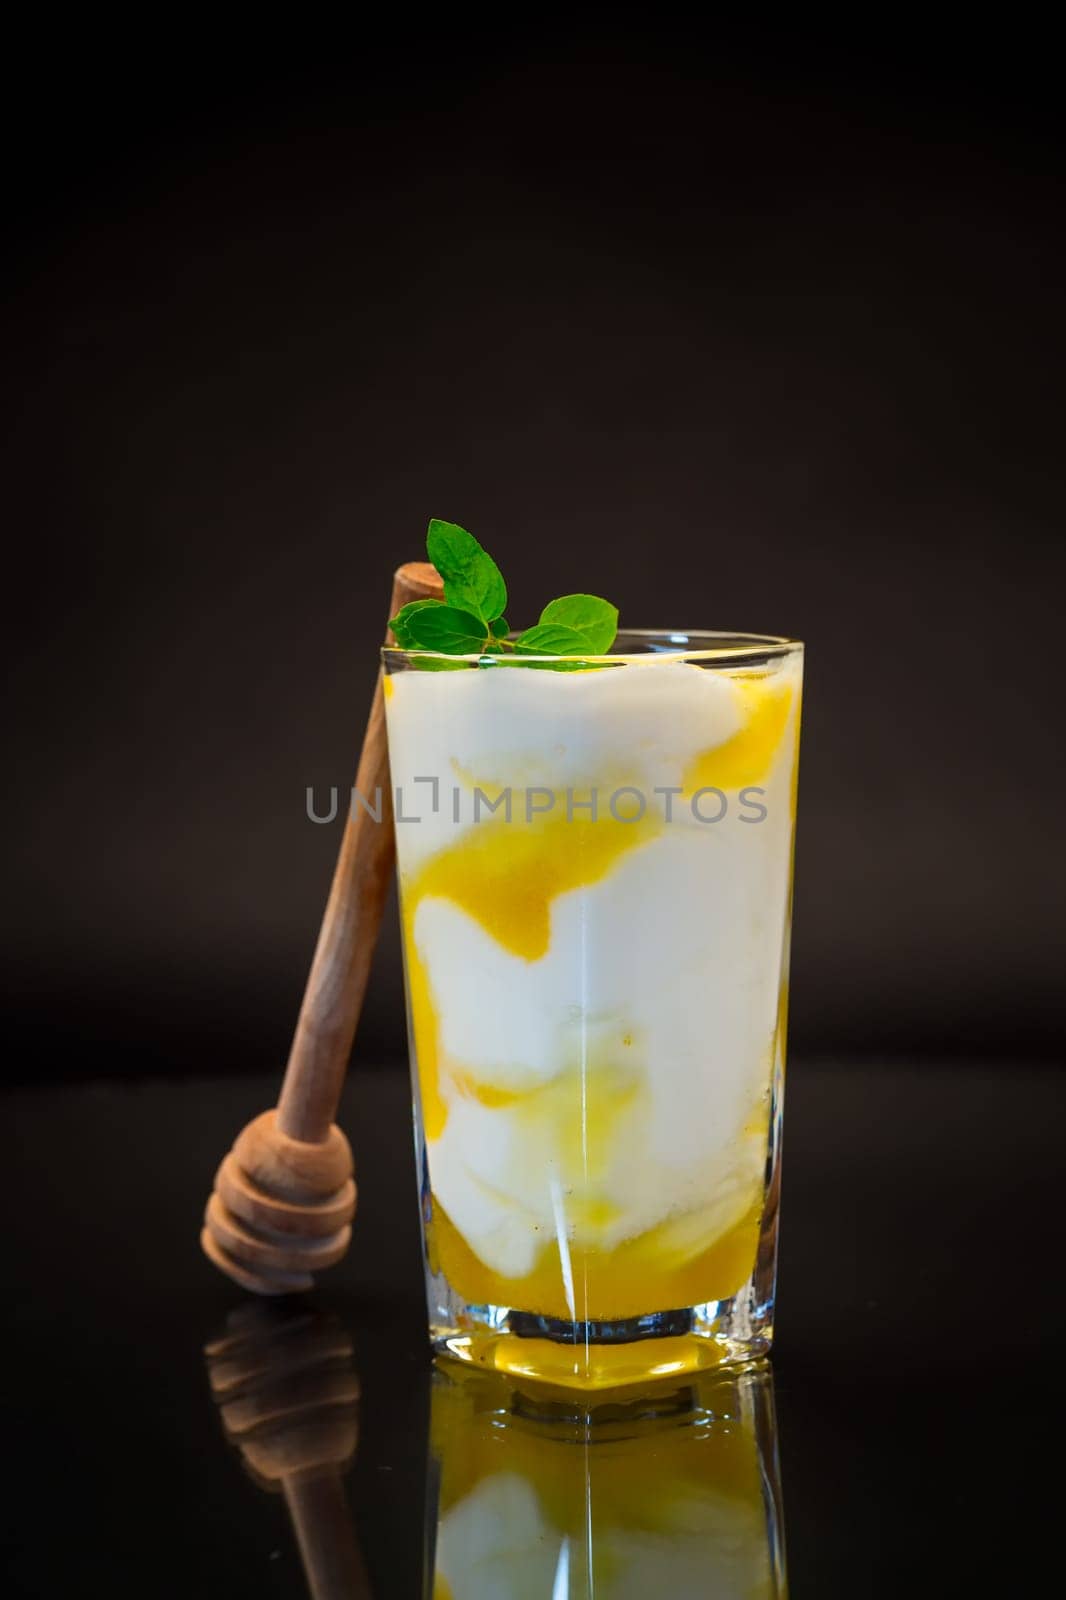 prepared homemade yogurt with natural honey in a glass isolated on a black background.